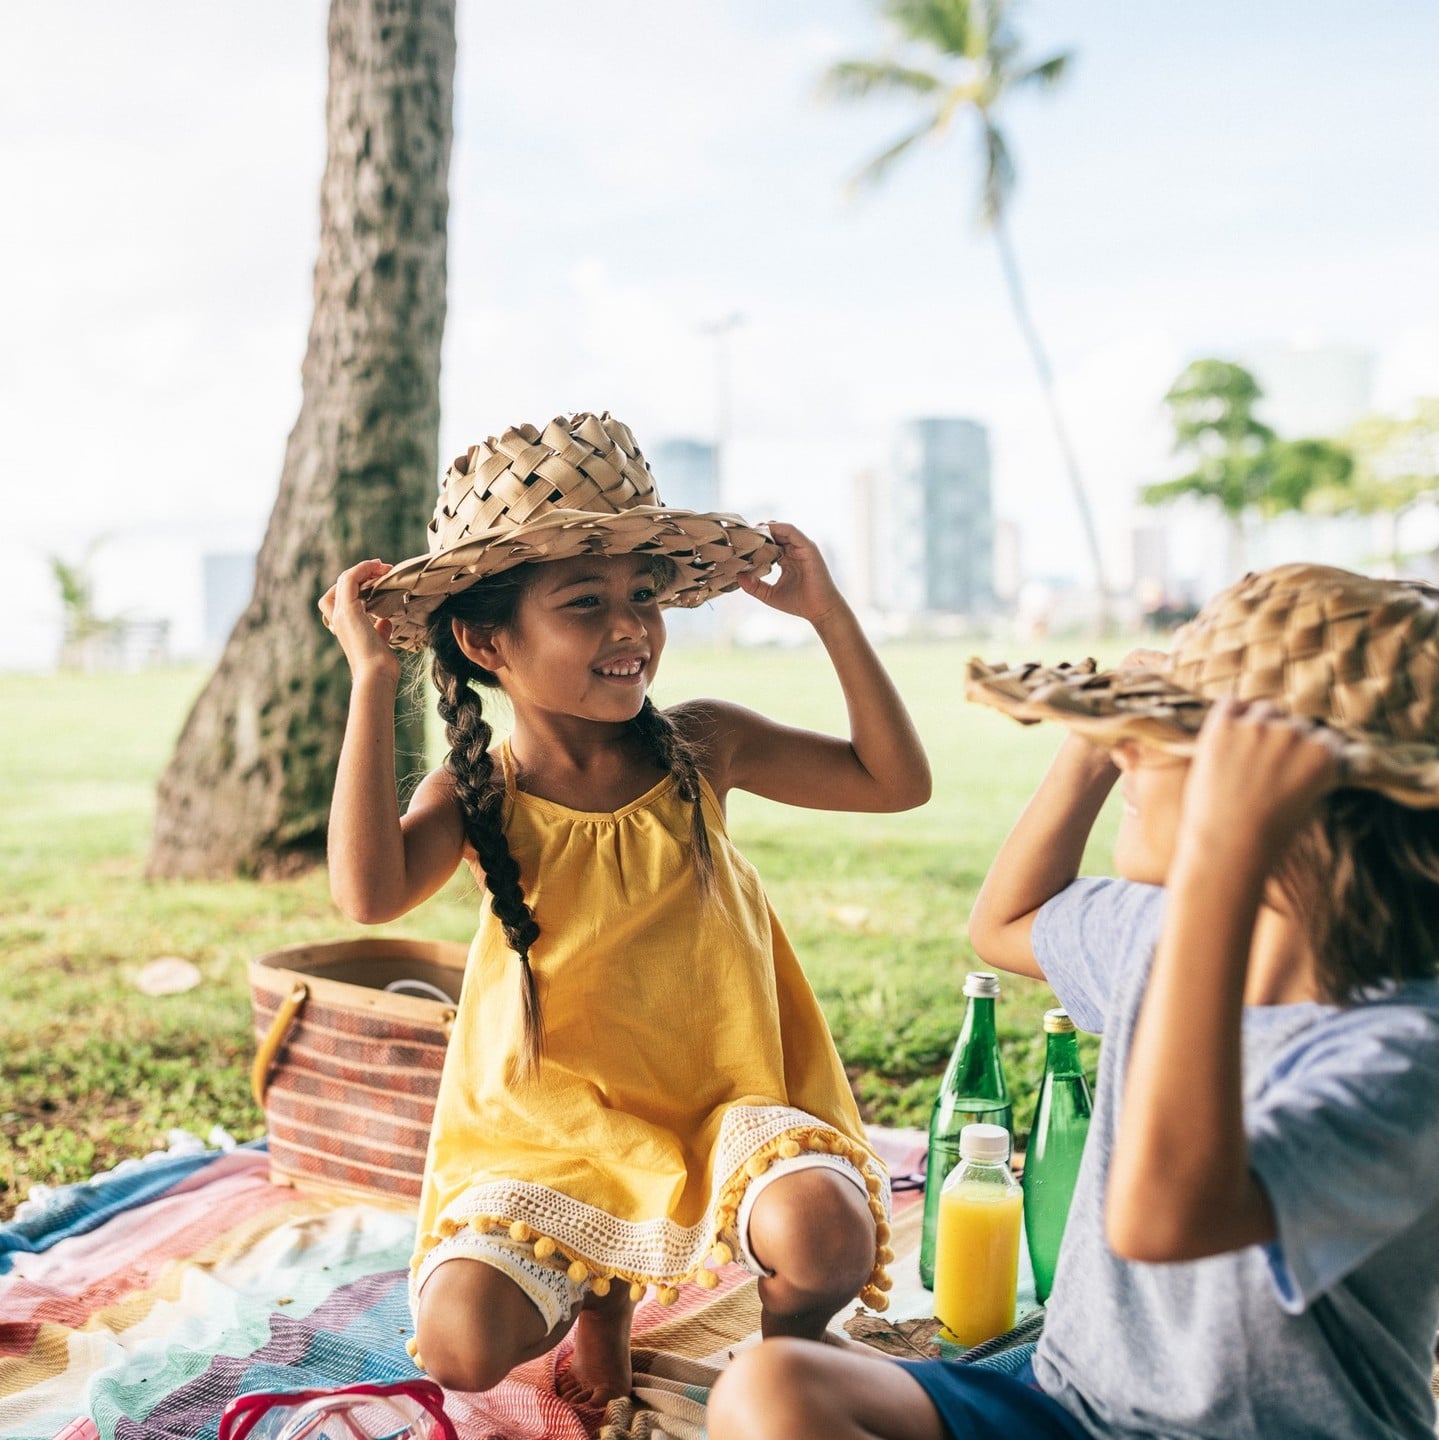 At Ward Village, enjoy parks perfect for a relaxed picnic under the palm trees.